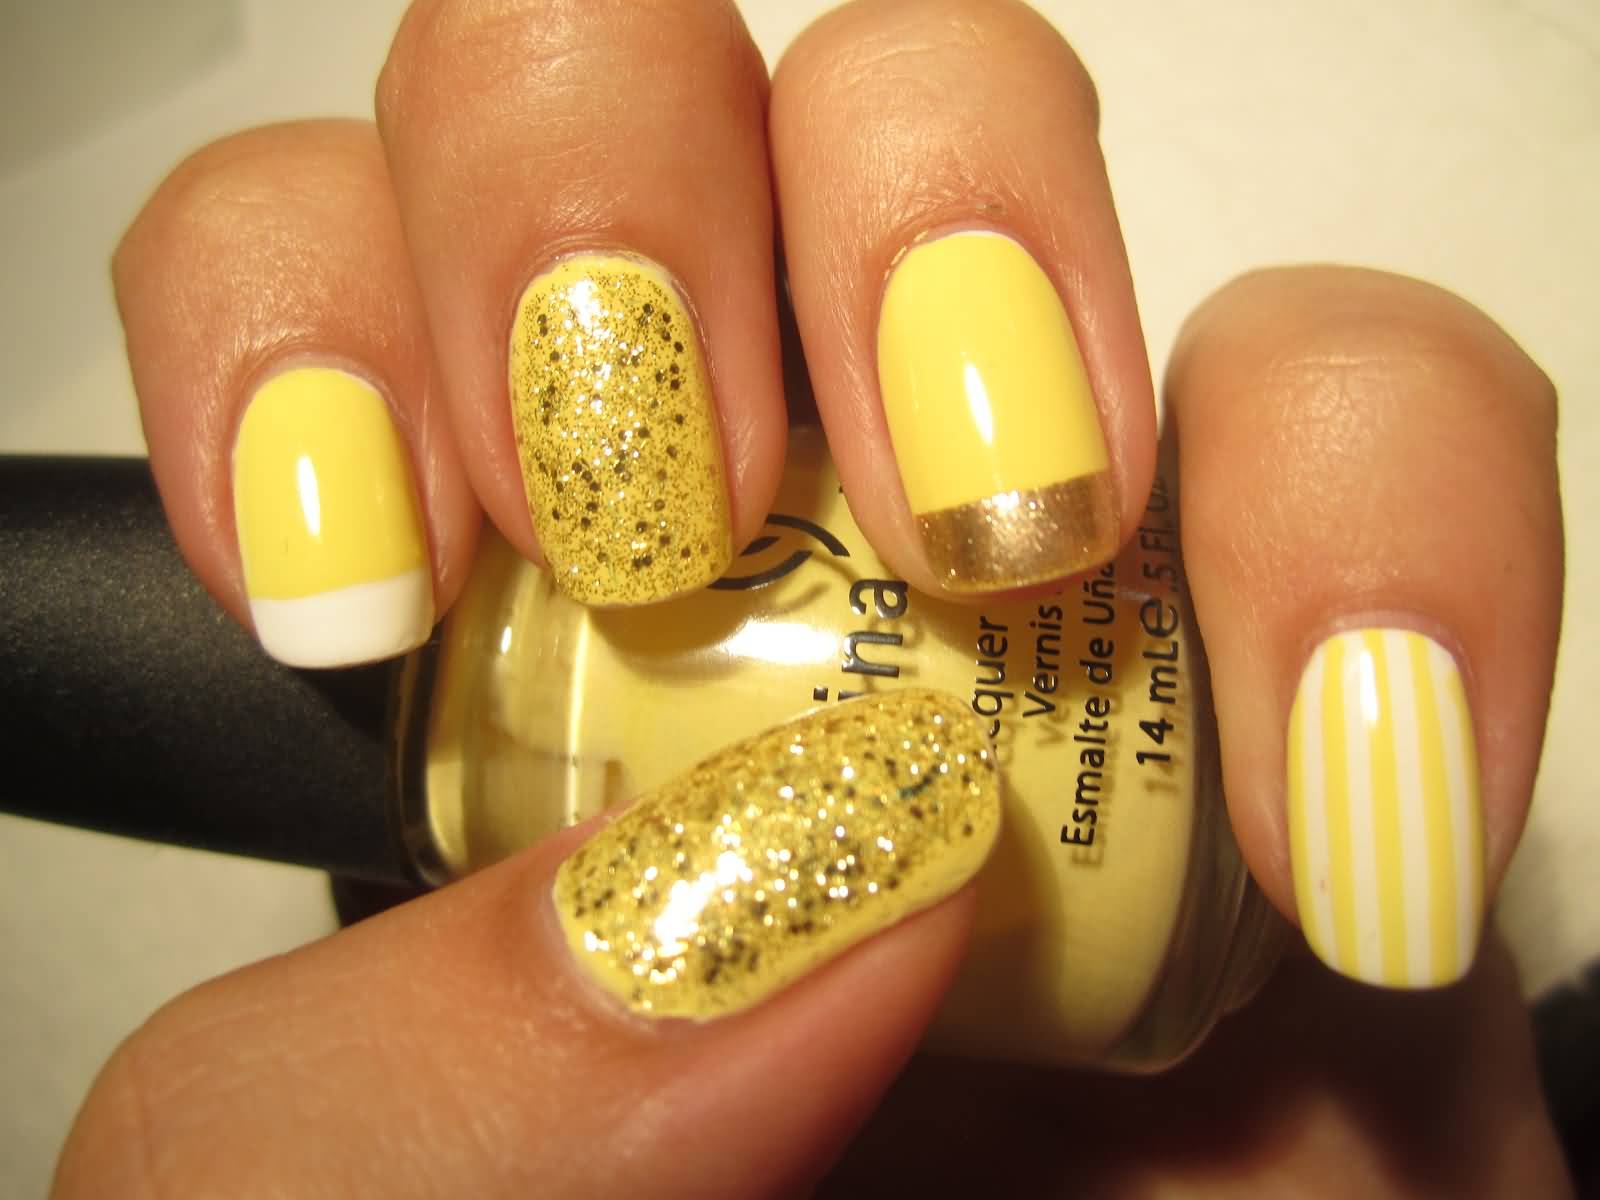 Golden State Nail Designs - wide 1